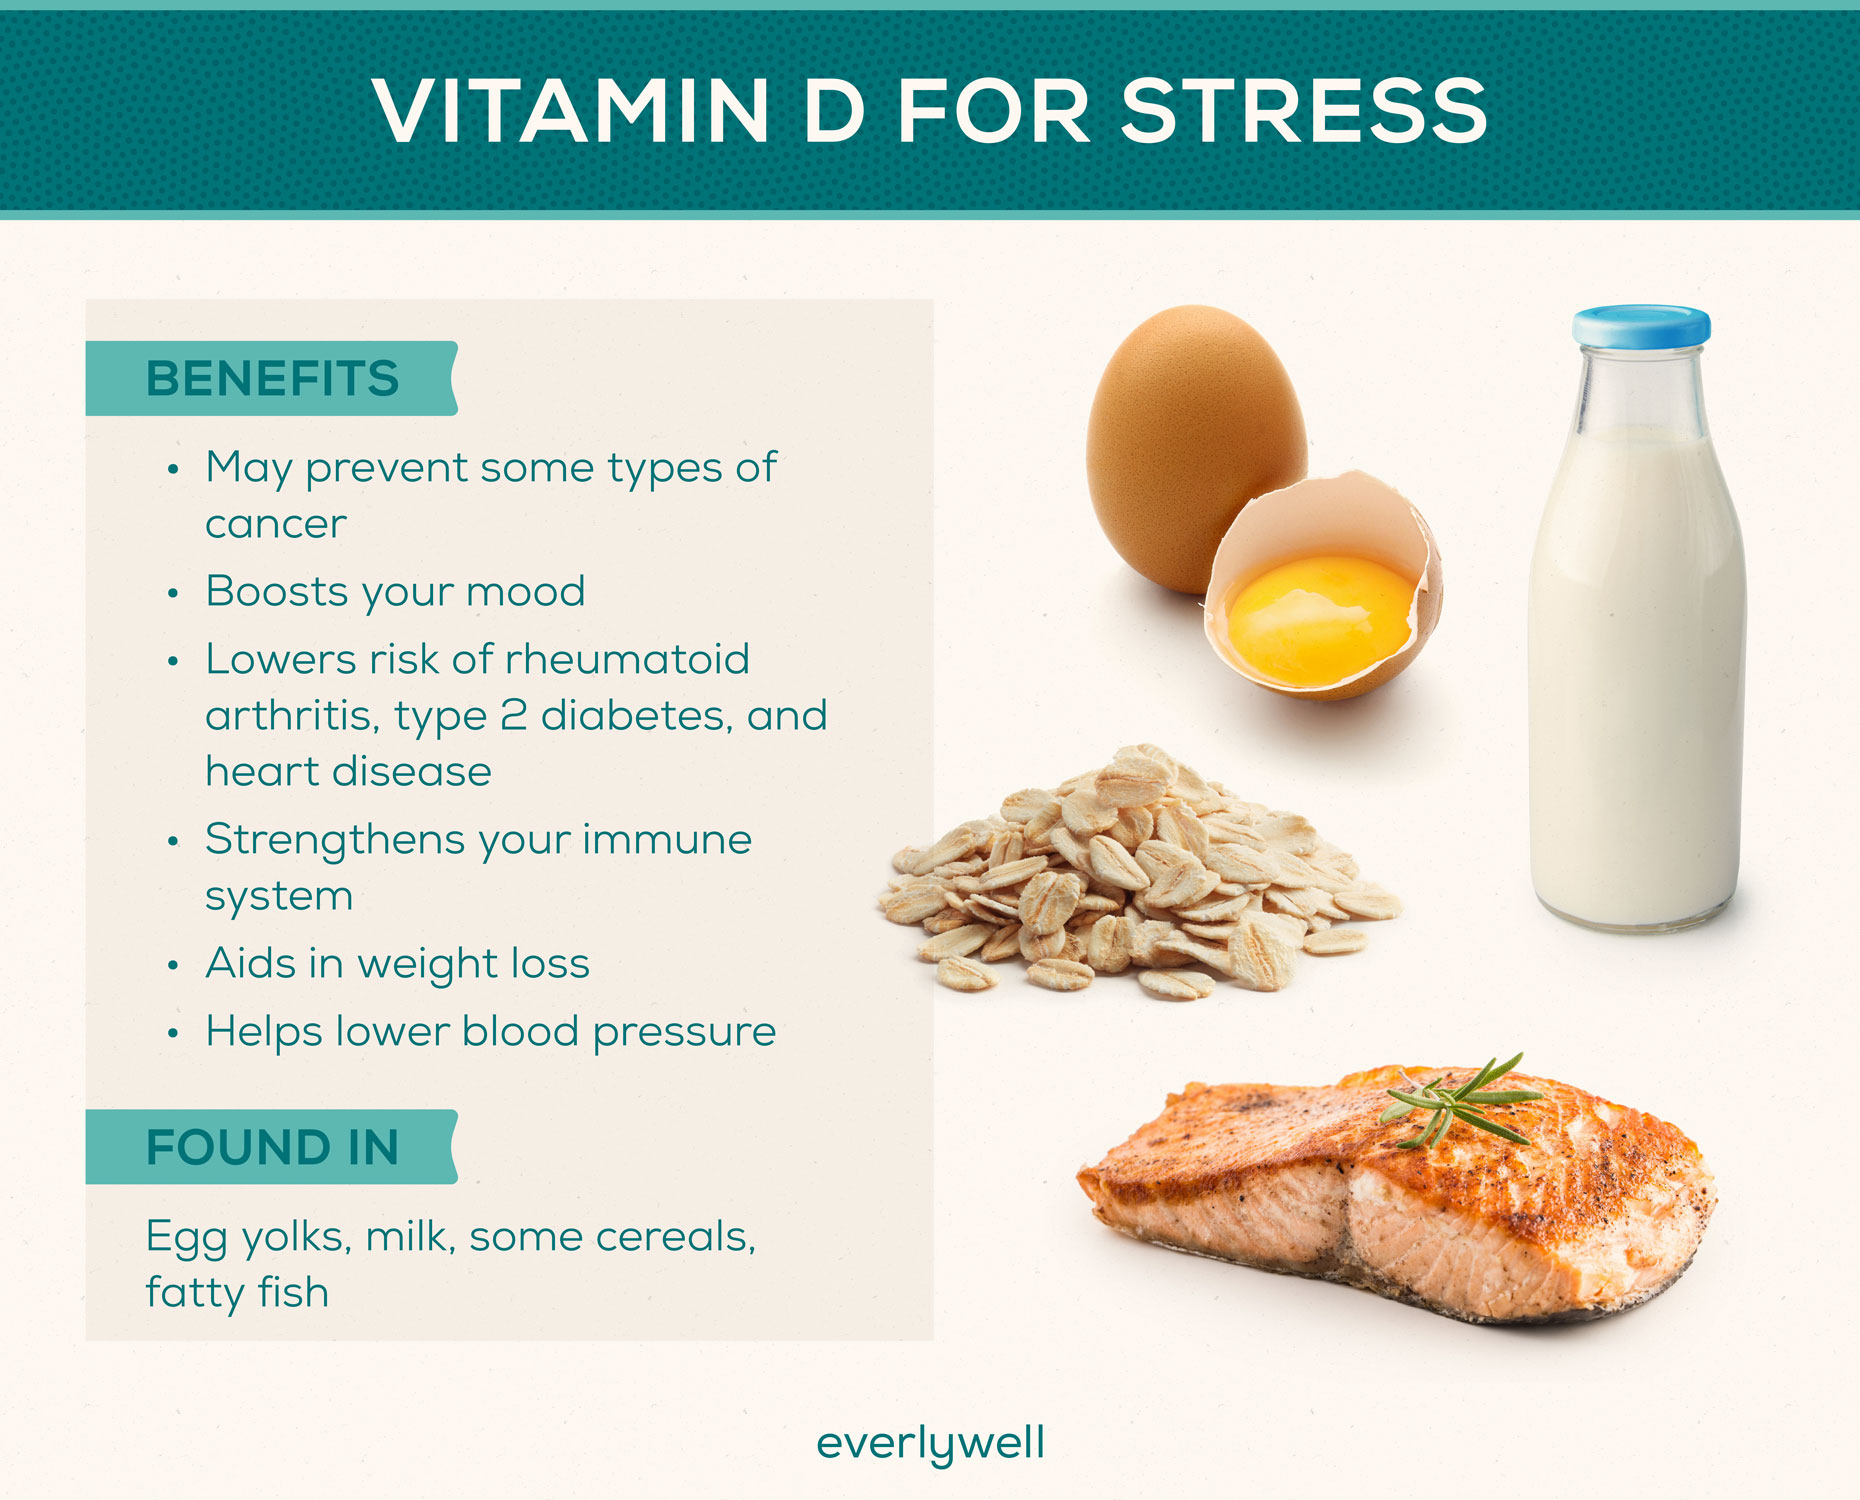 Examples of foods with vitamin D and list of benefits of vitamin D for stress